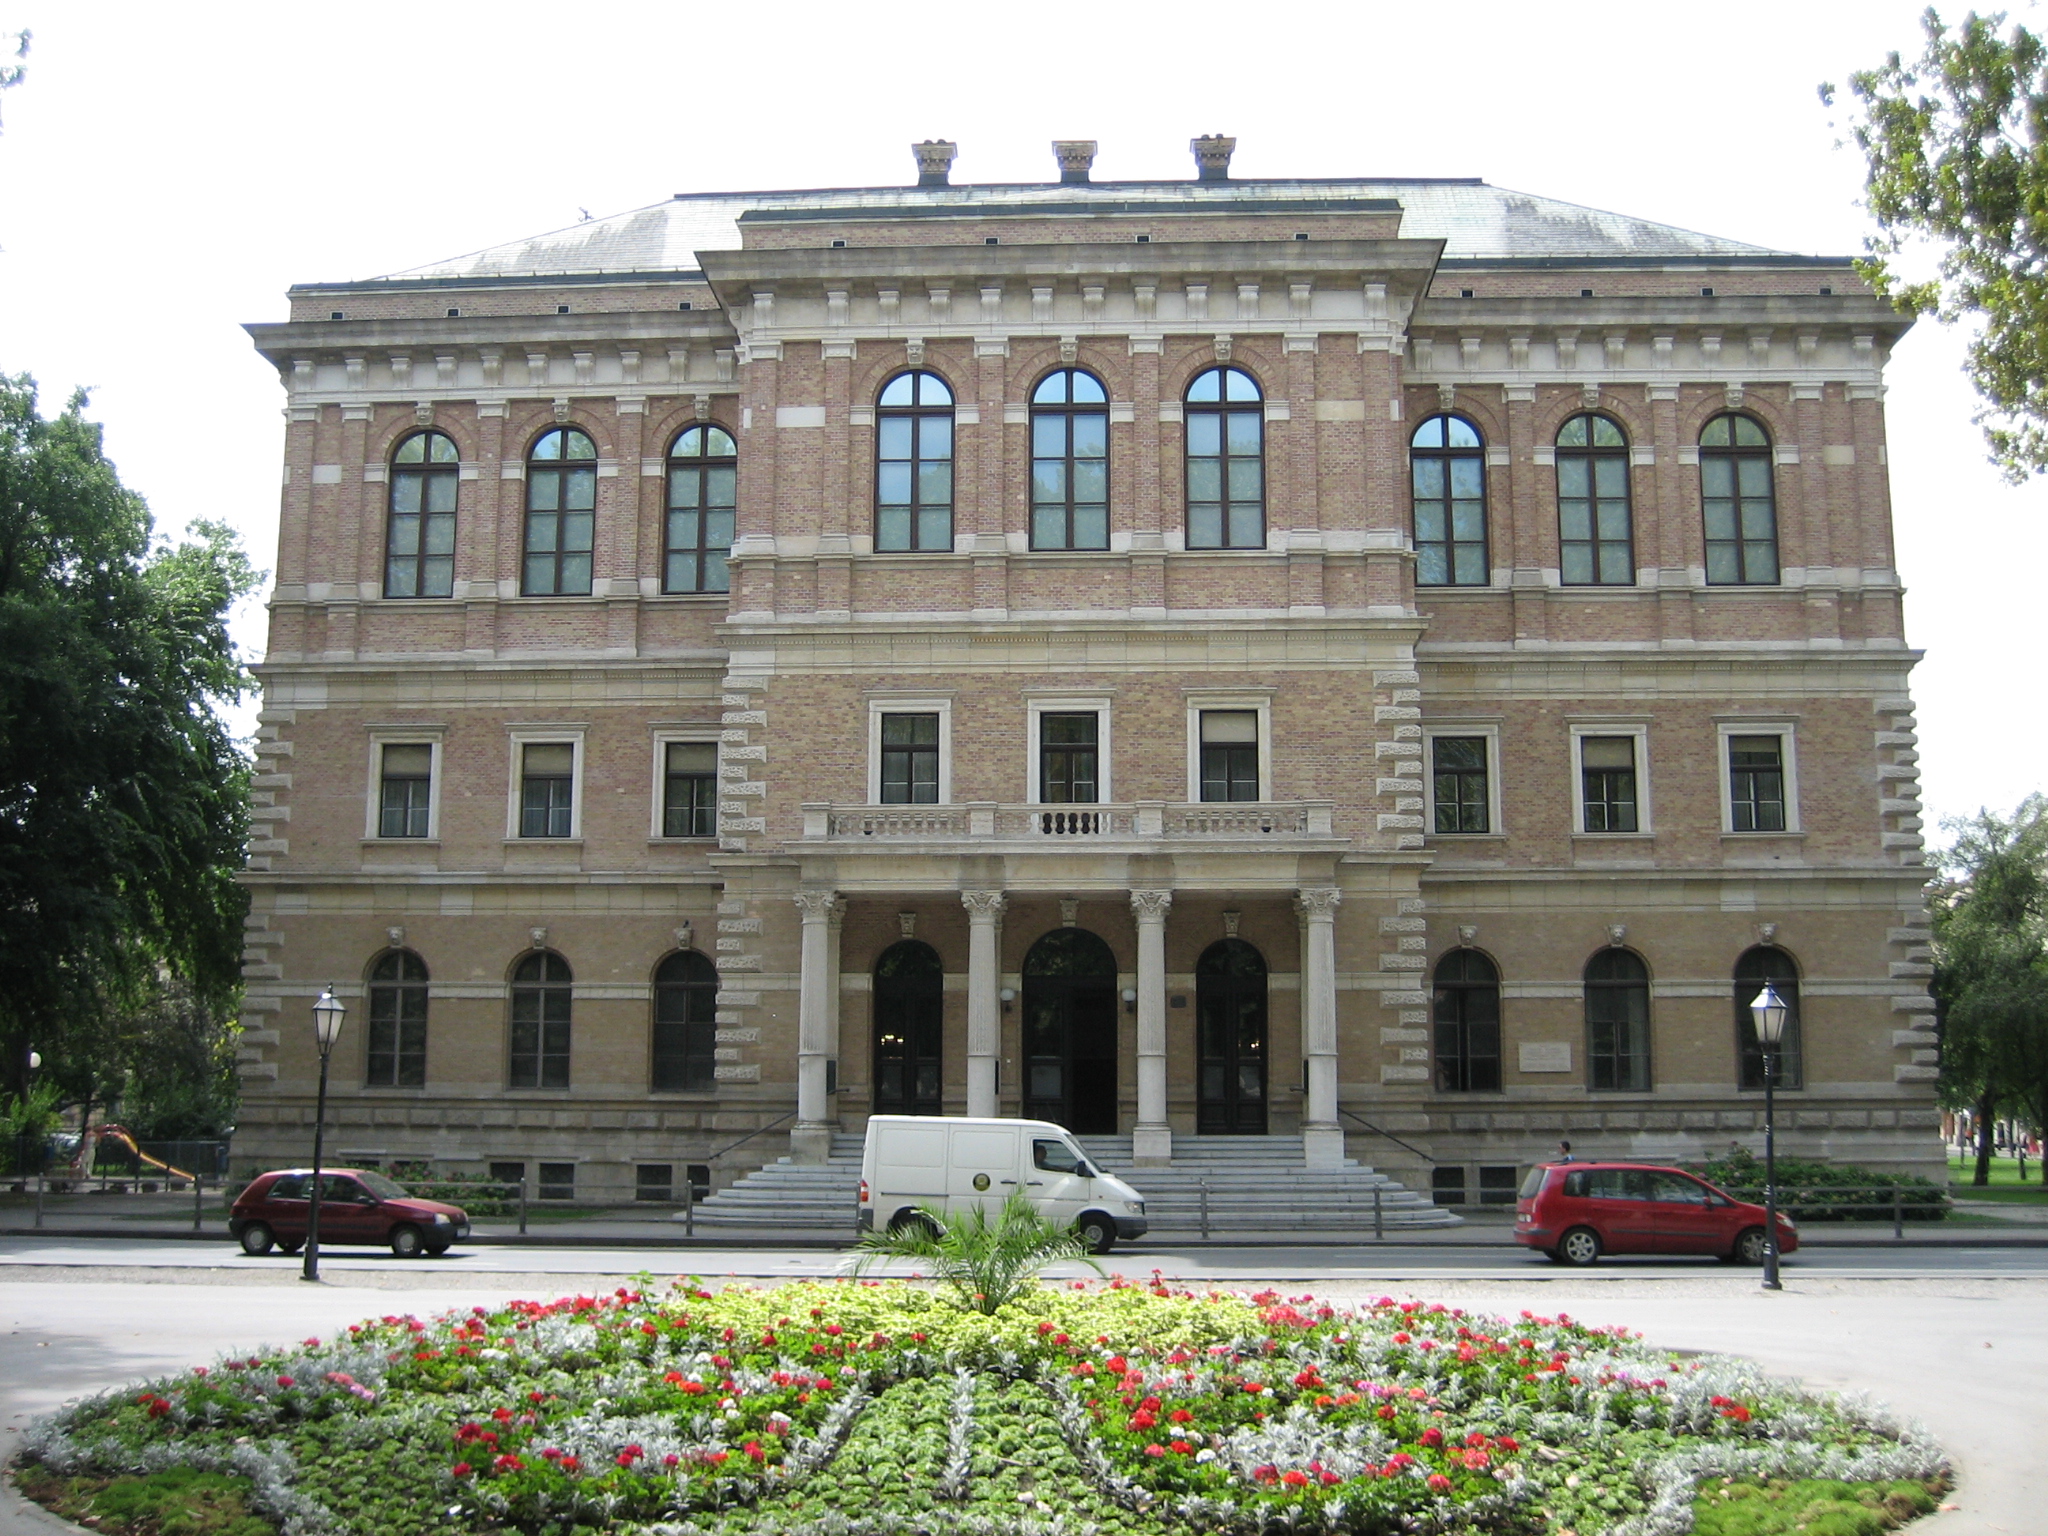 Croatian Academy of Science and Arts